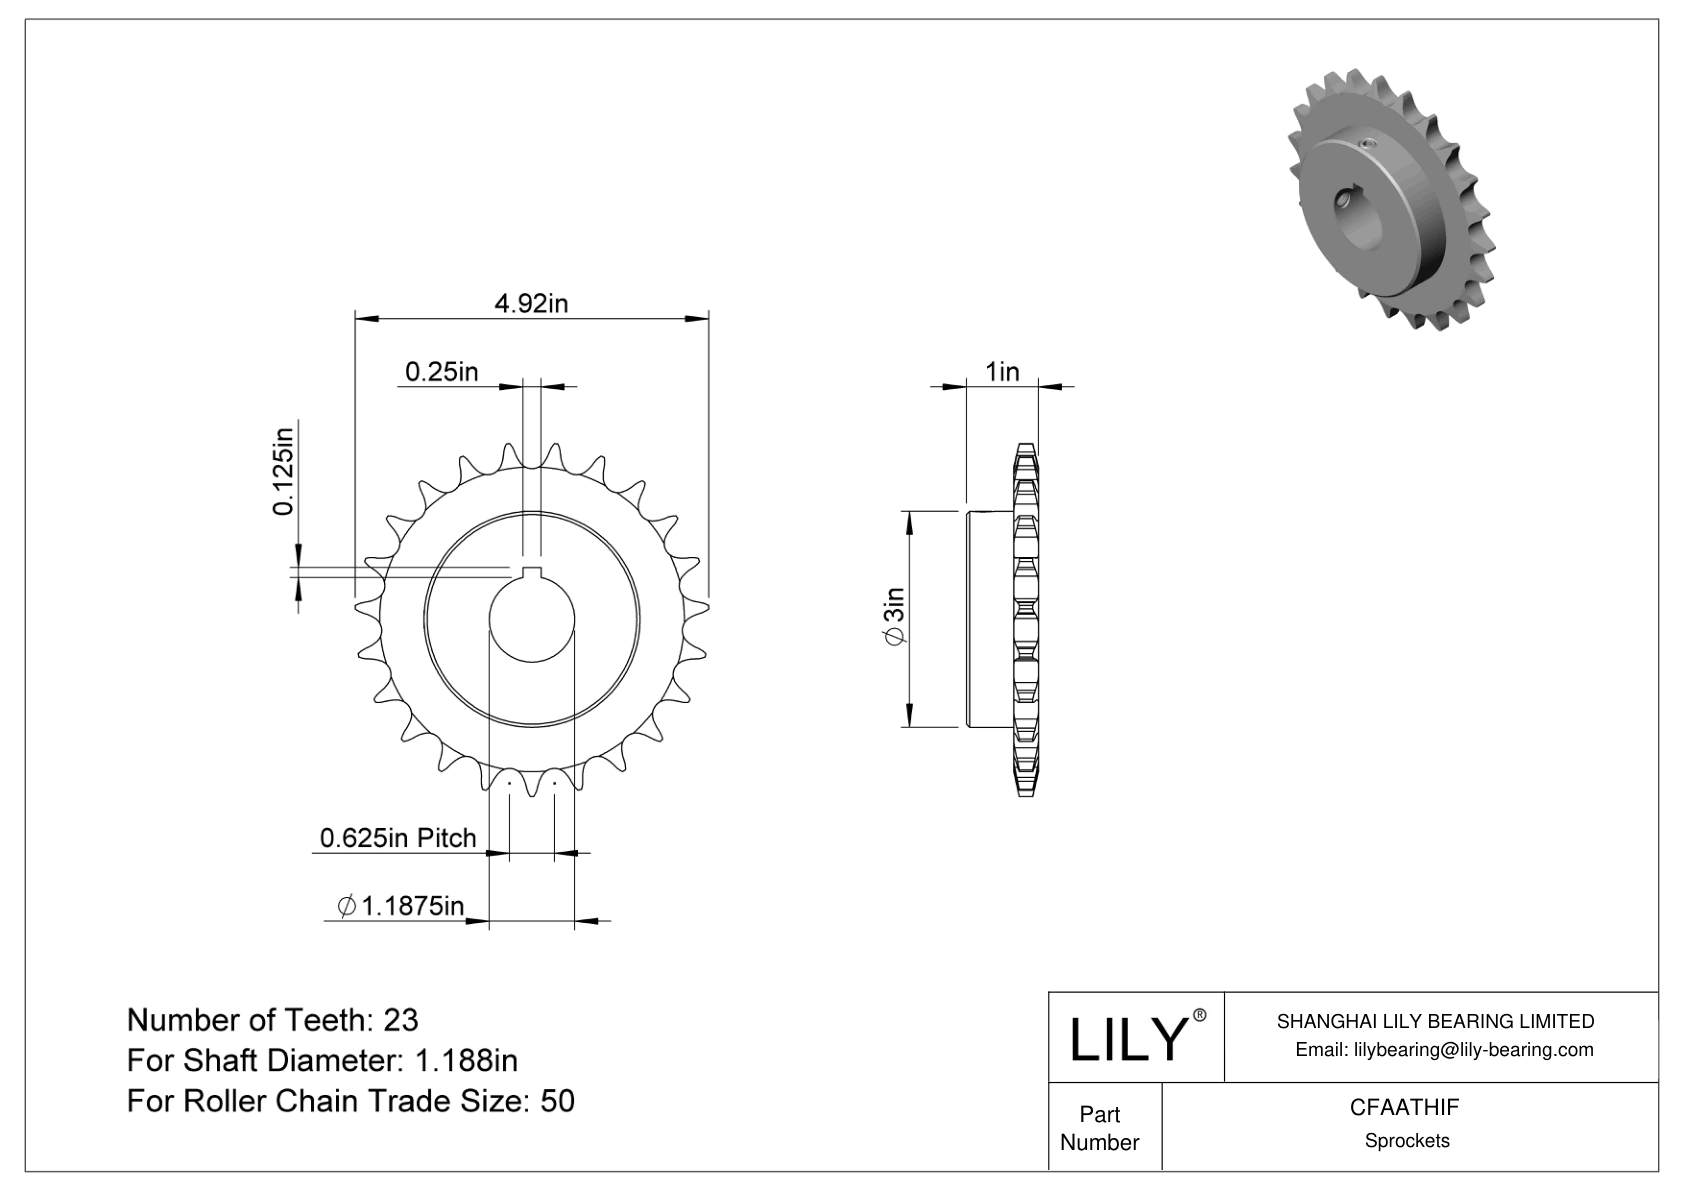 CFAATHIF Wear-Resistant Sprockets for ANSI Roller Chain cad drawing